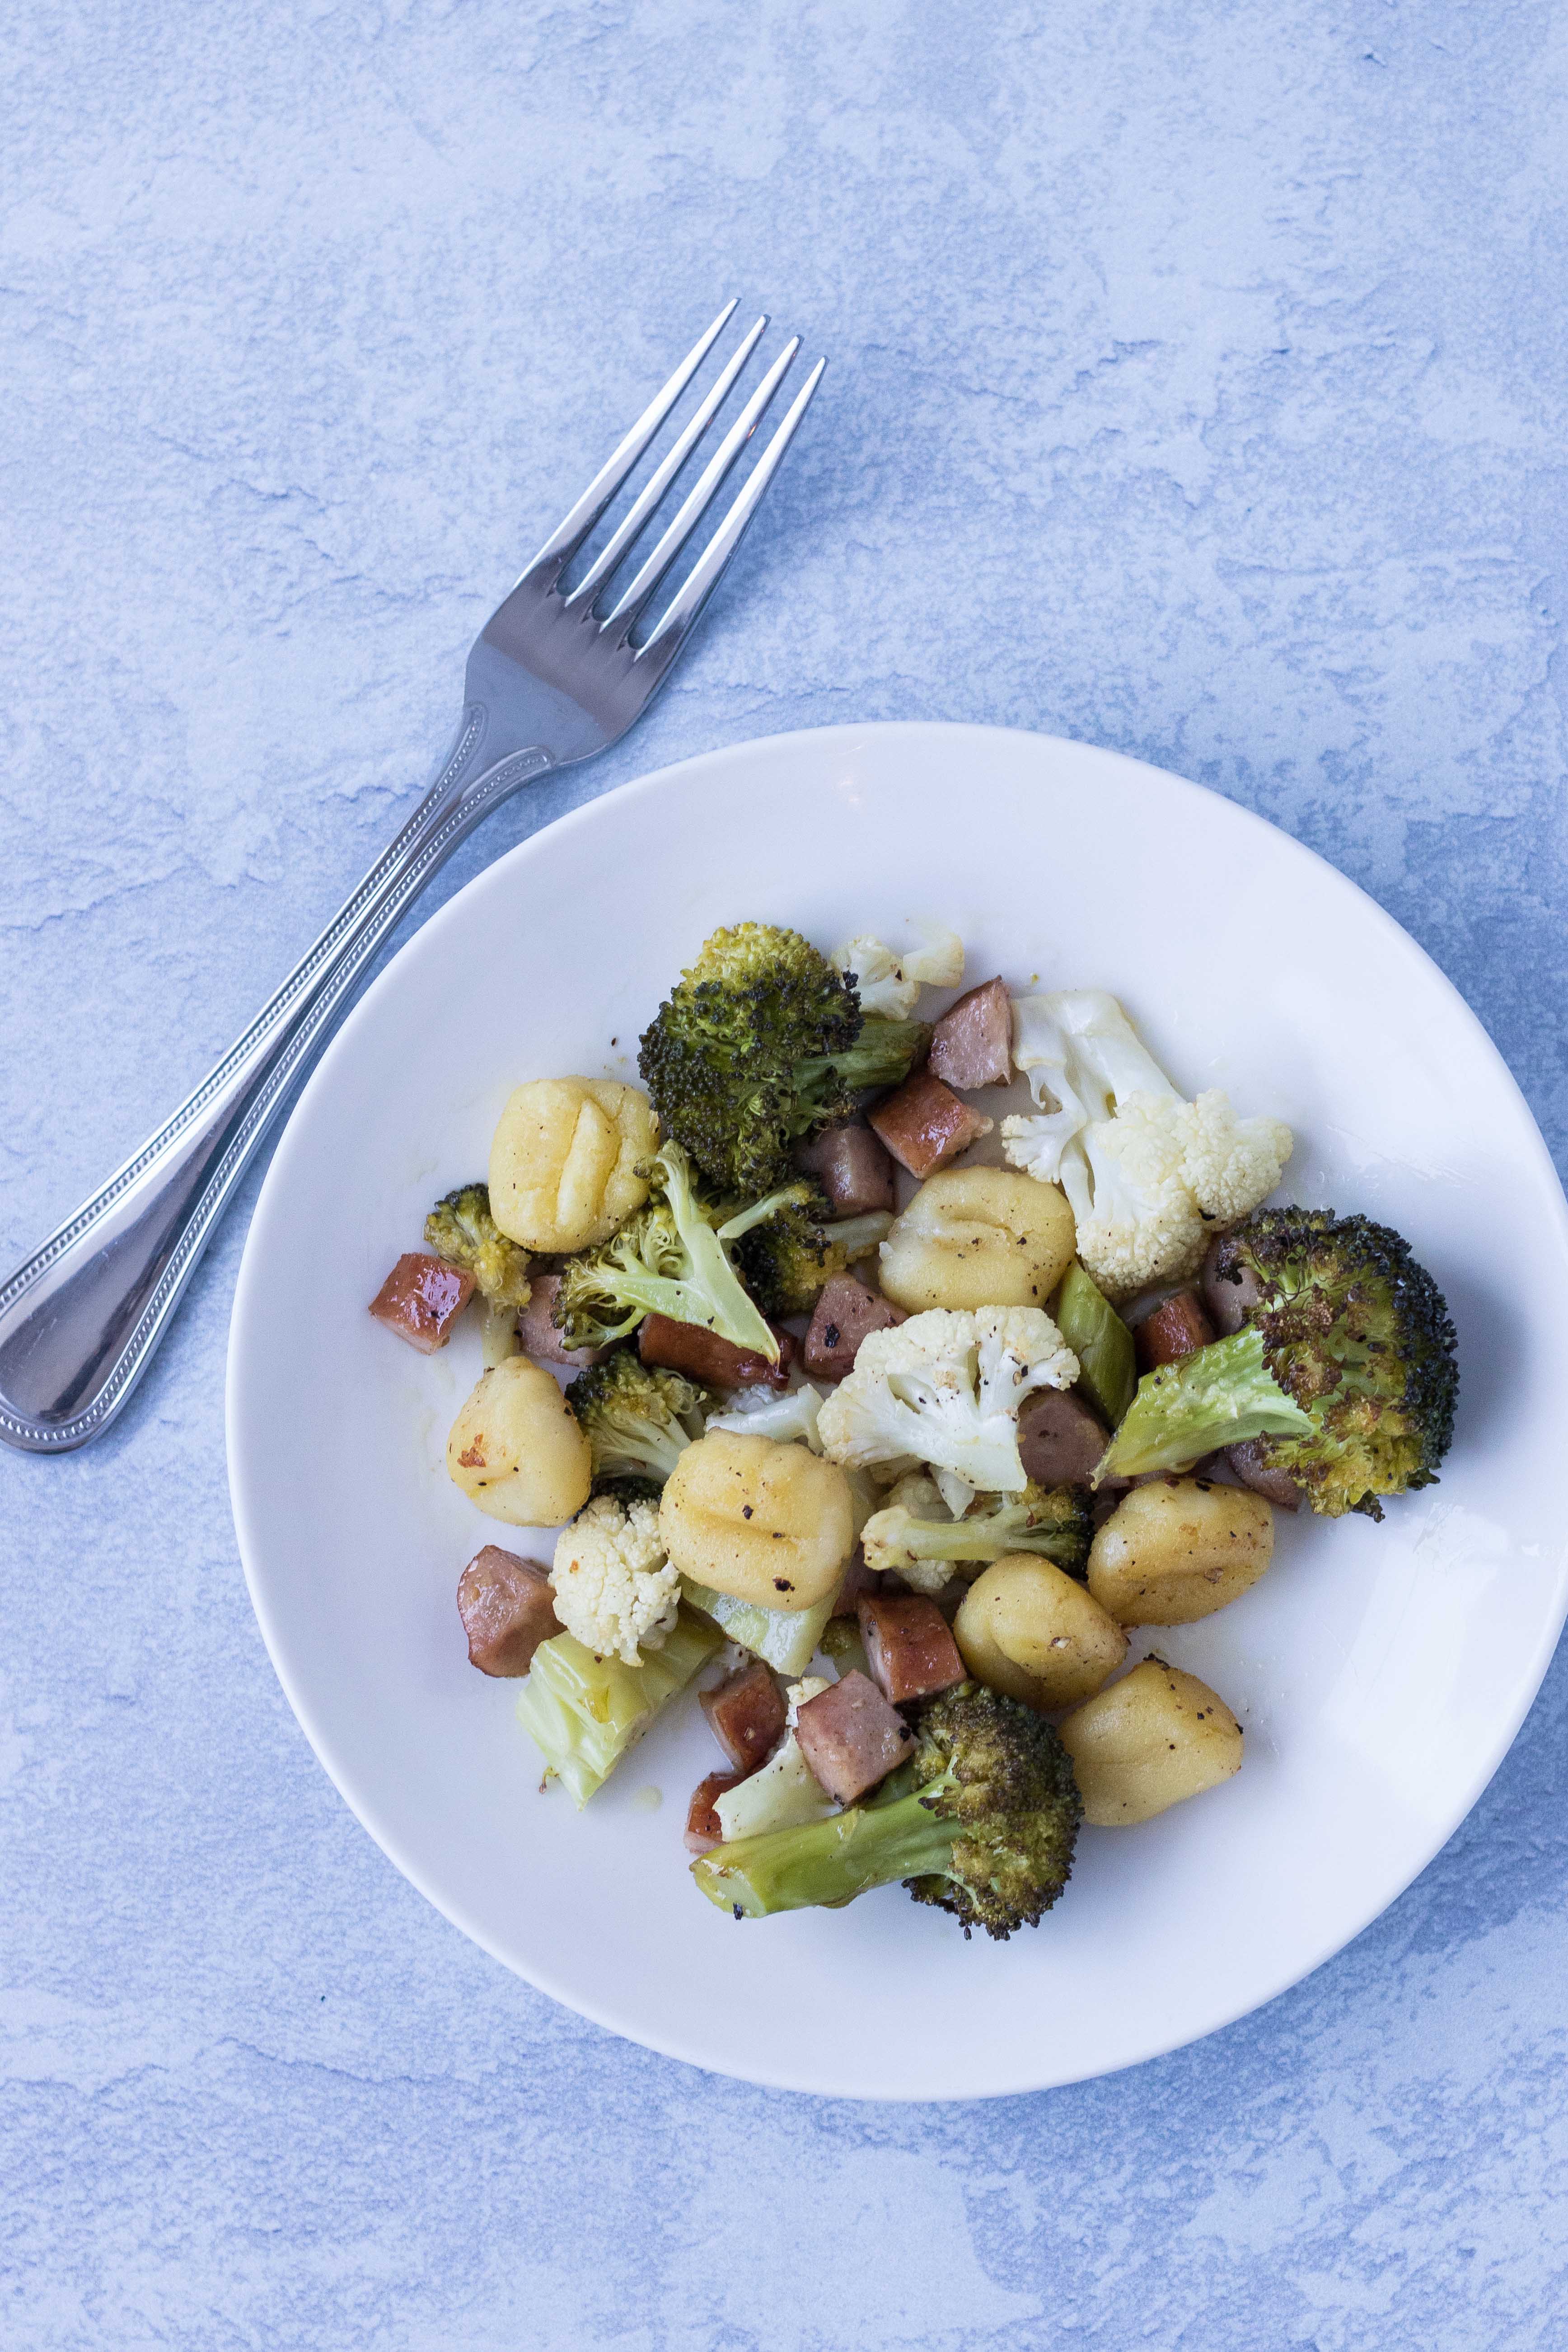 Sheet pan gnocchi with chicken sausage and vegetables is quick and healthy! The perfect weeknight dinner. #healthyeating #weeknightdinner #sheetpanmeal | https://www.roseclearfield.com